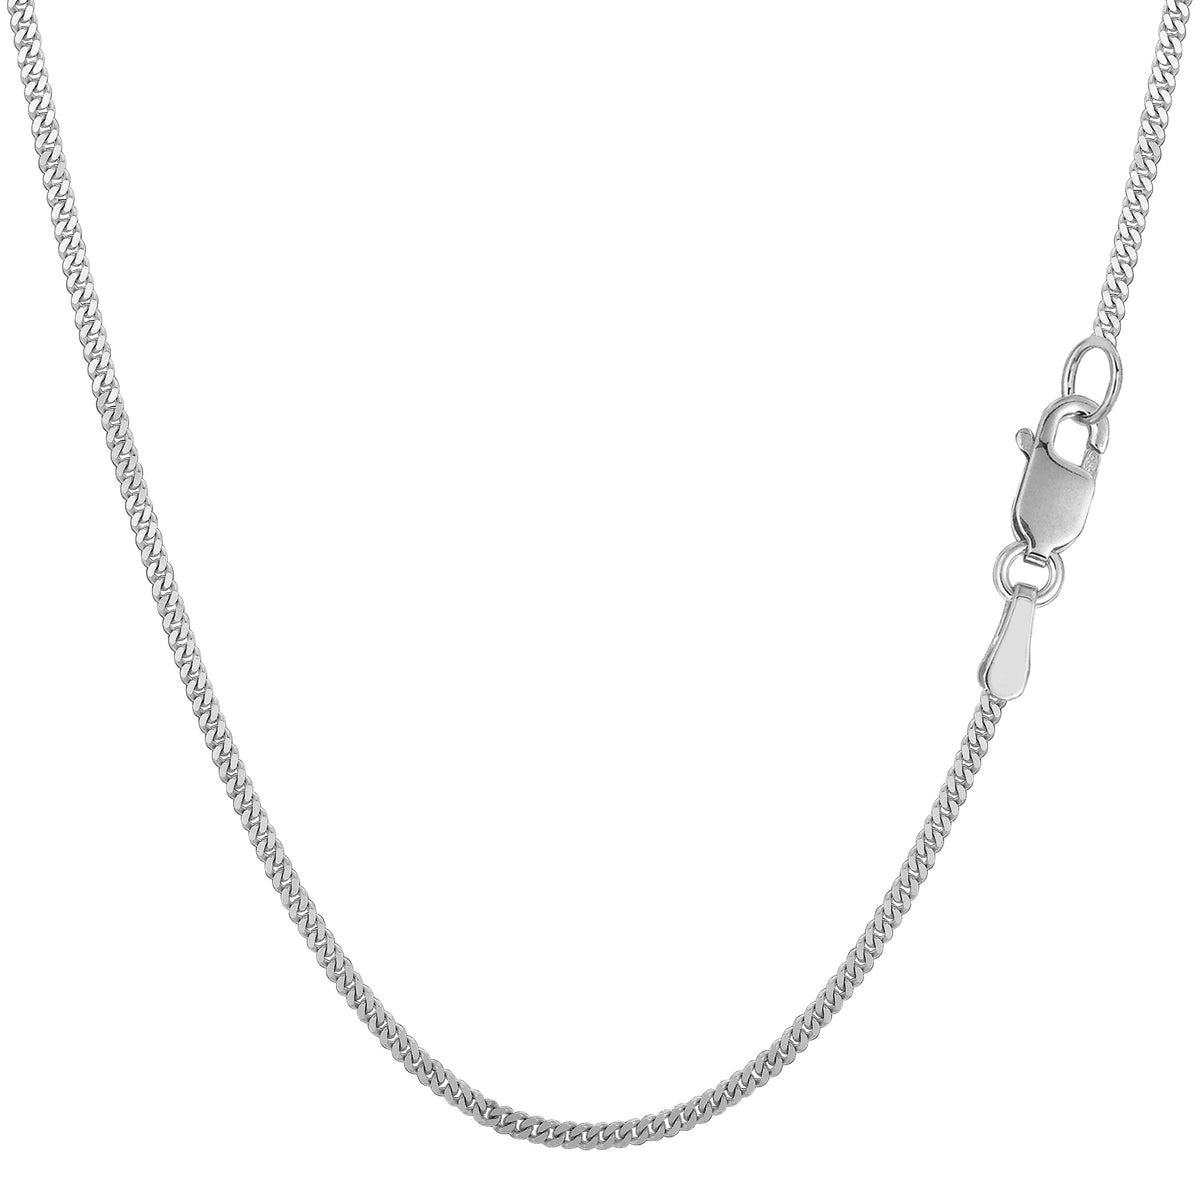 14k White Gold Gourmette Chain Necklace, 1.5mm fine designer jewelry for men and women